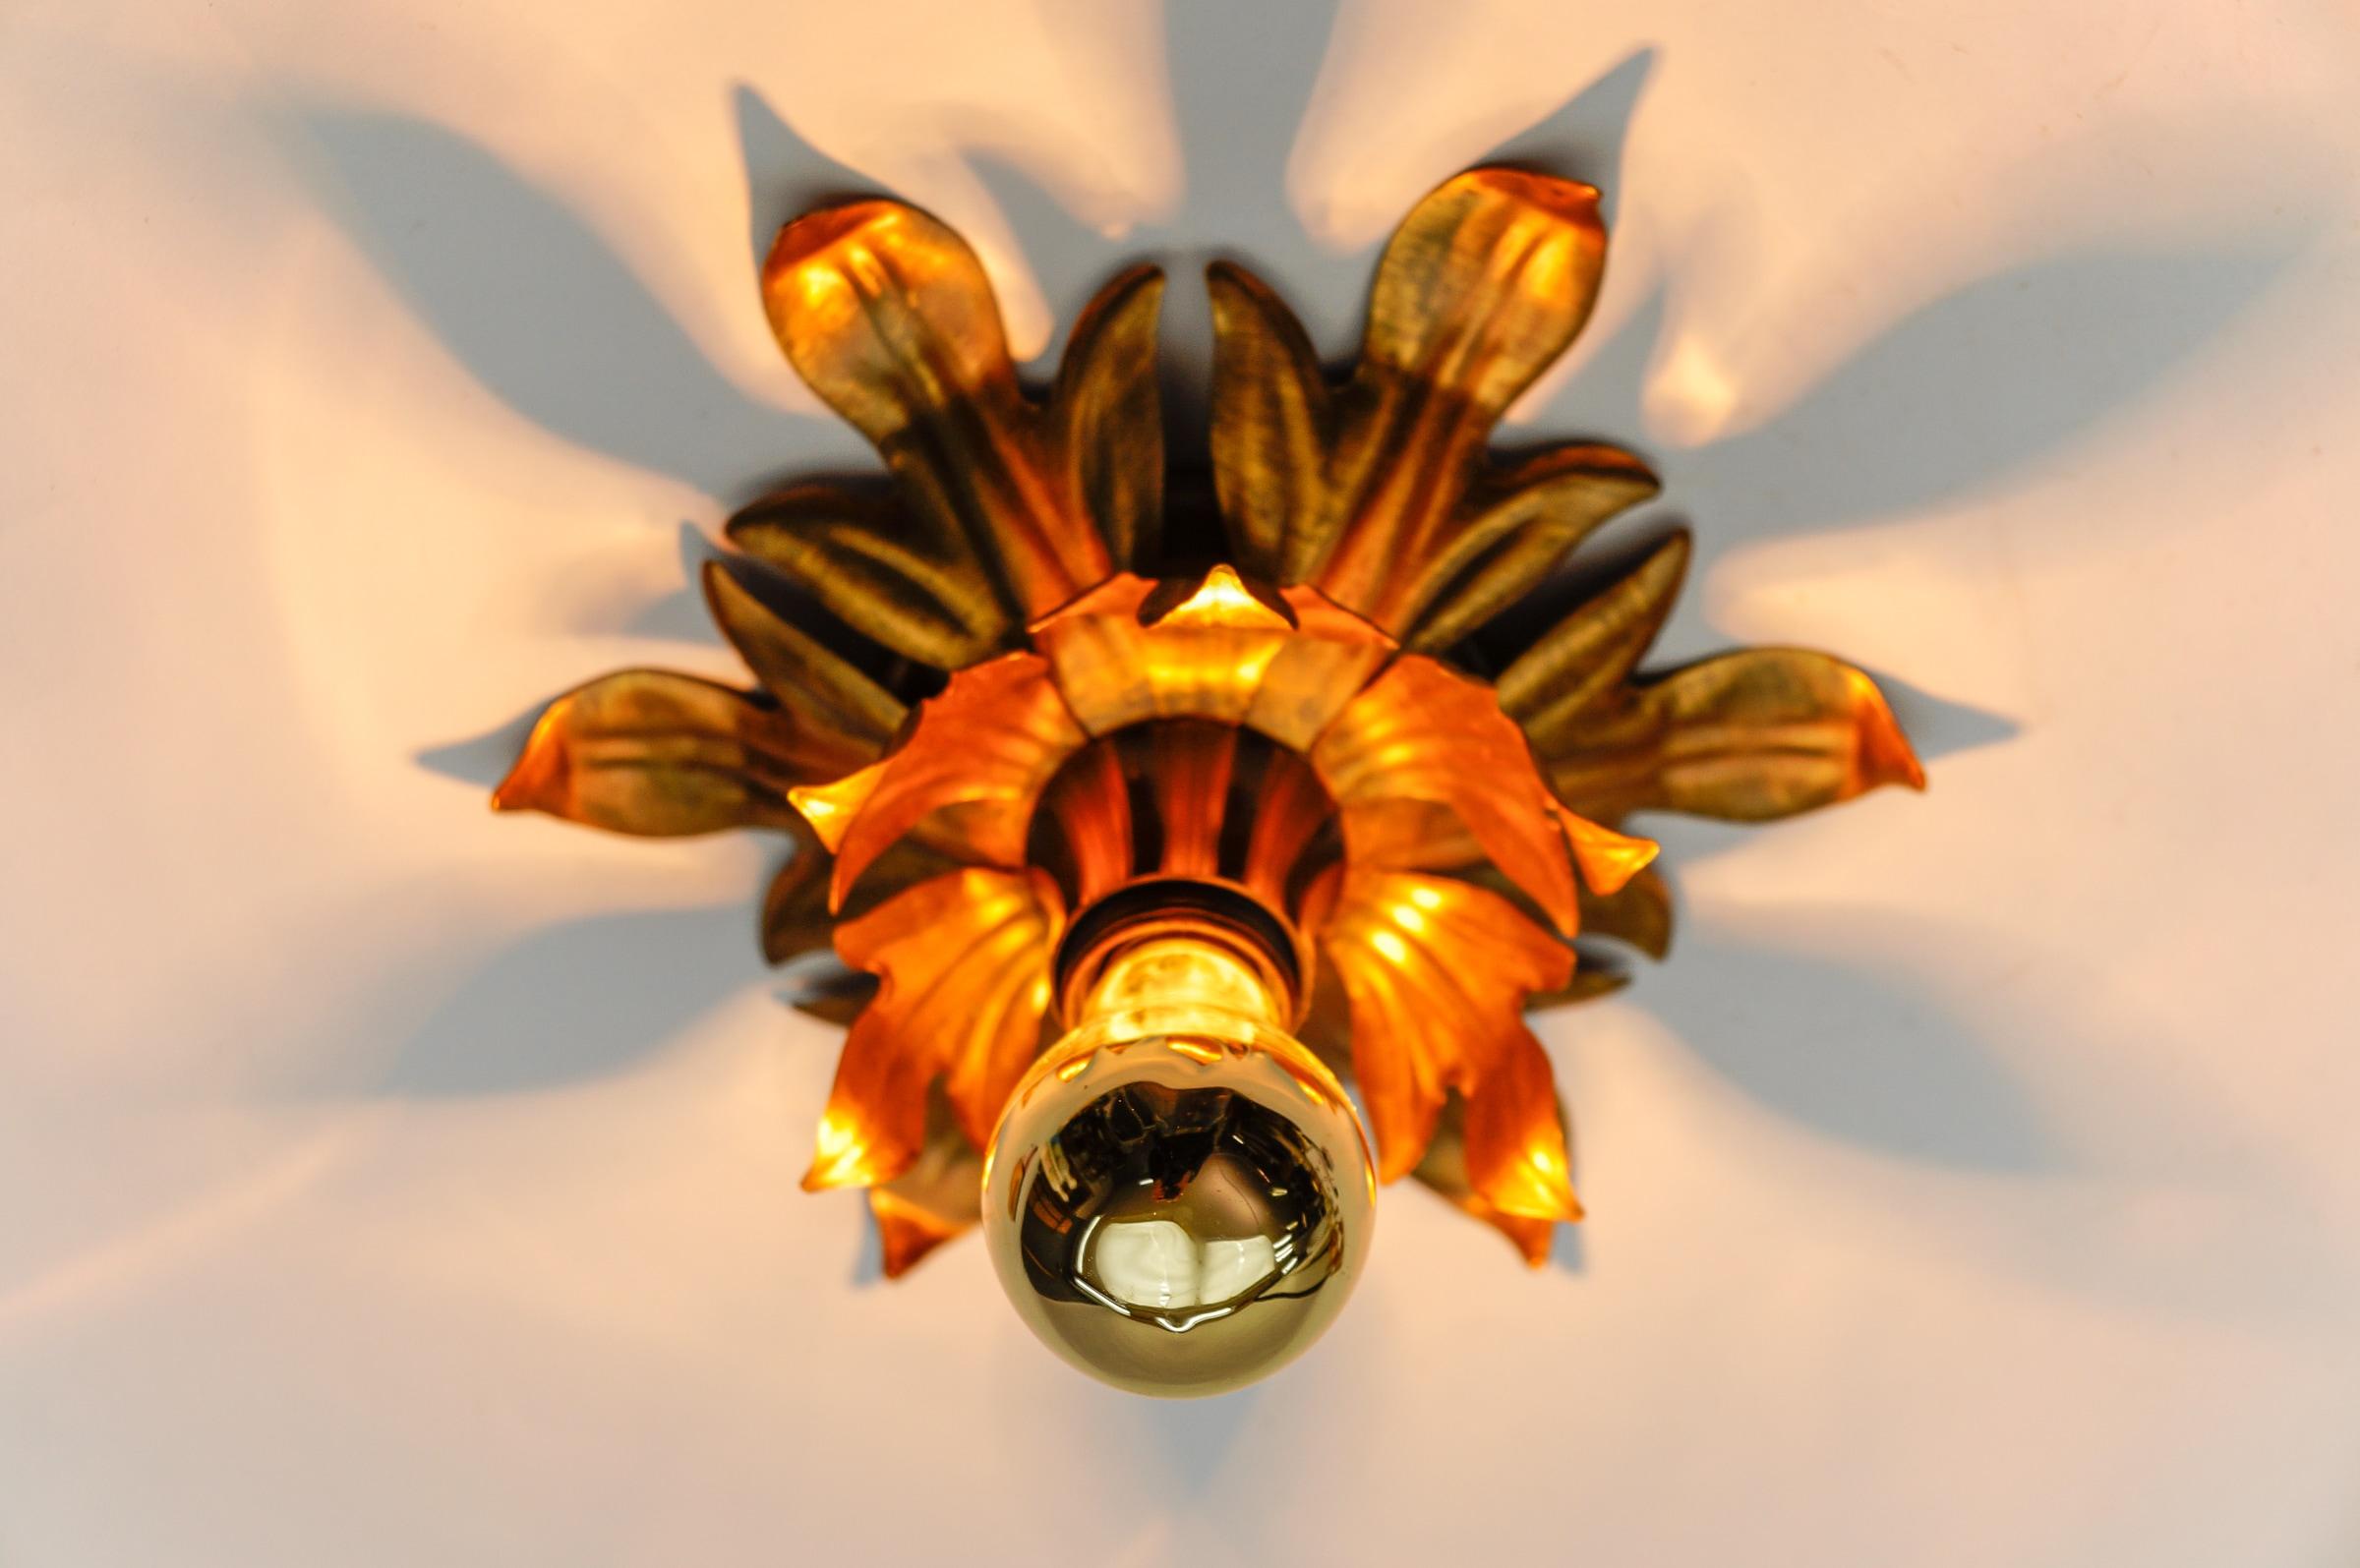 Metal Lovely Petit Gilded Florentine Ceiling Lamp by Kögl, Germany, 1960s For Sale